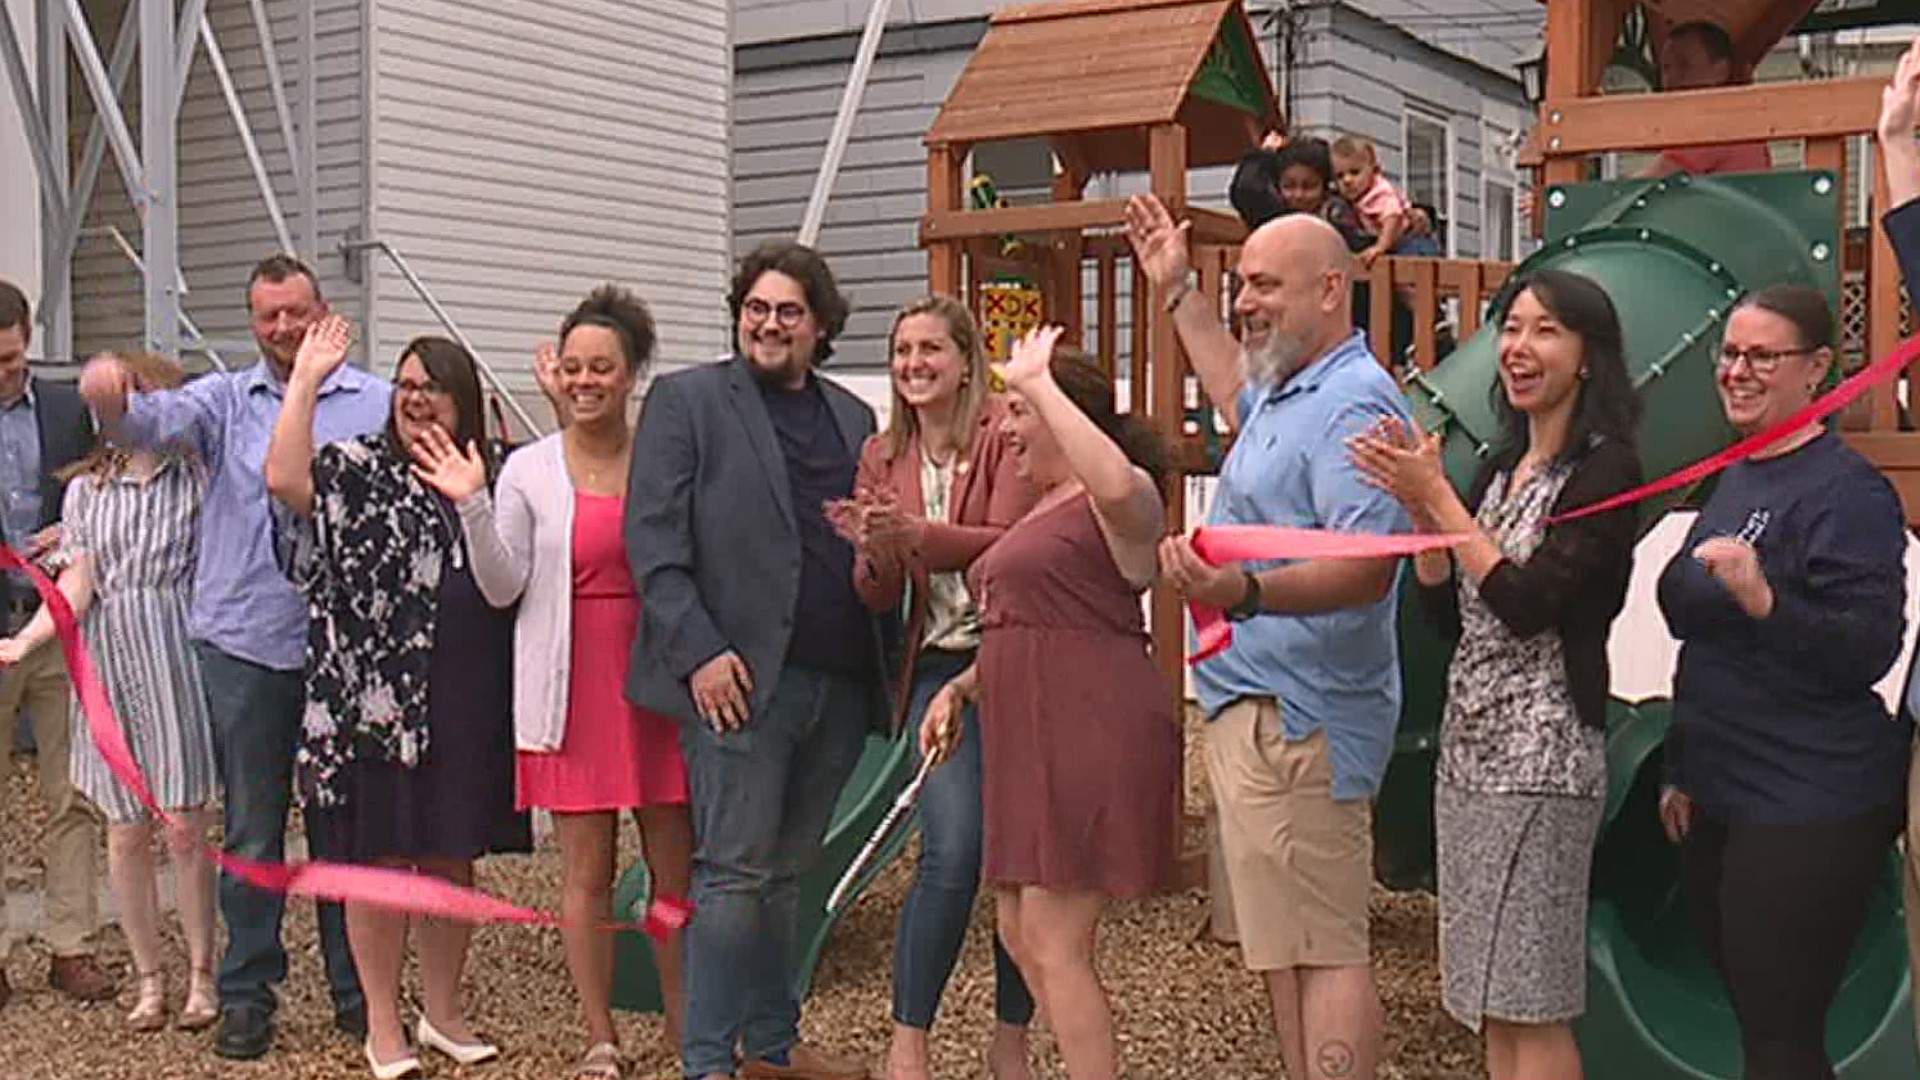 There's a new backyard playground for foster children in Hazleton.